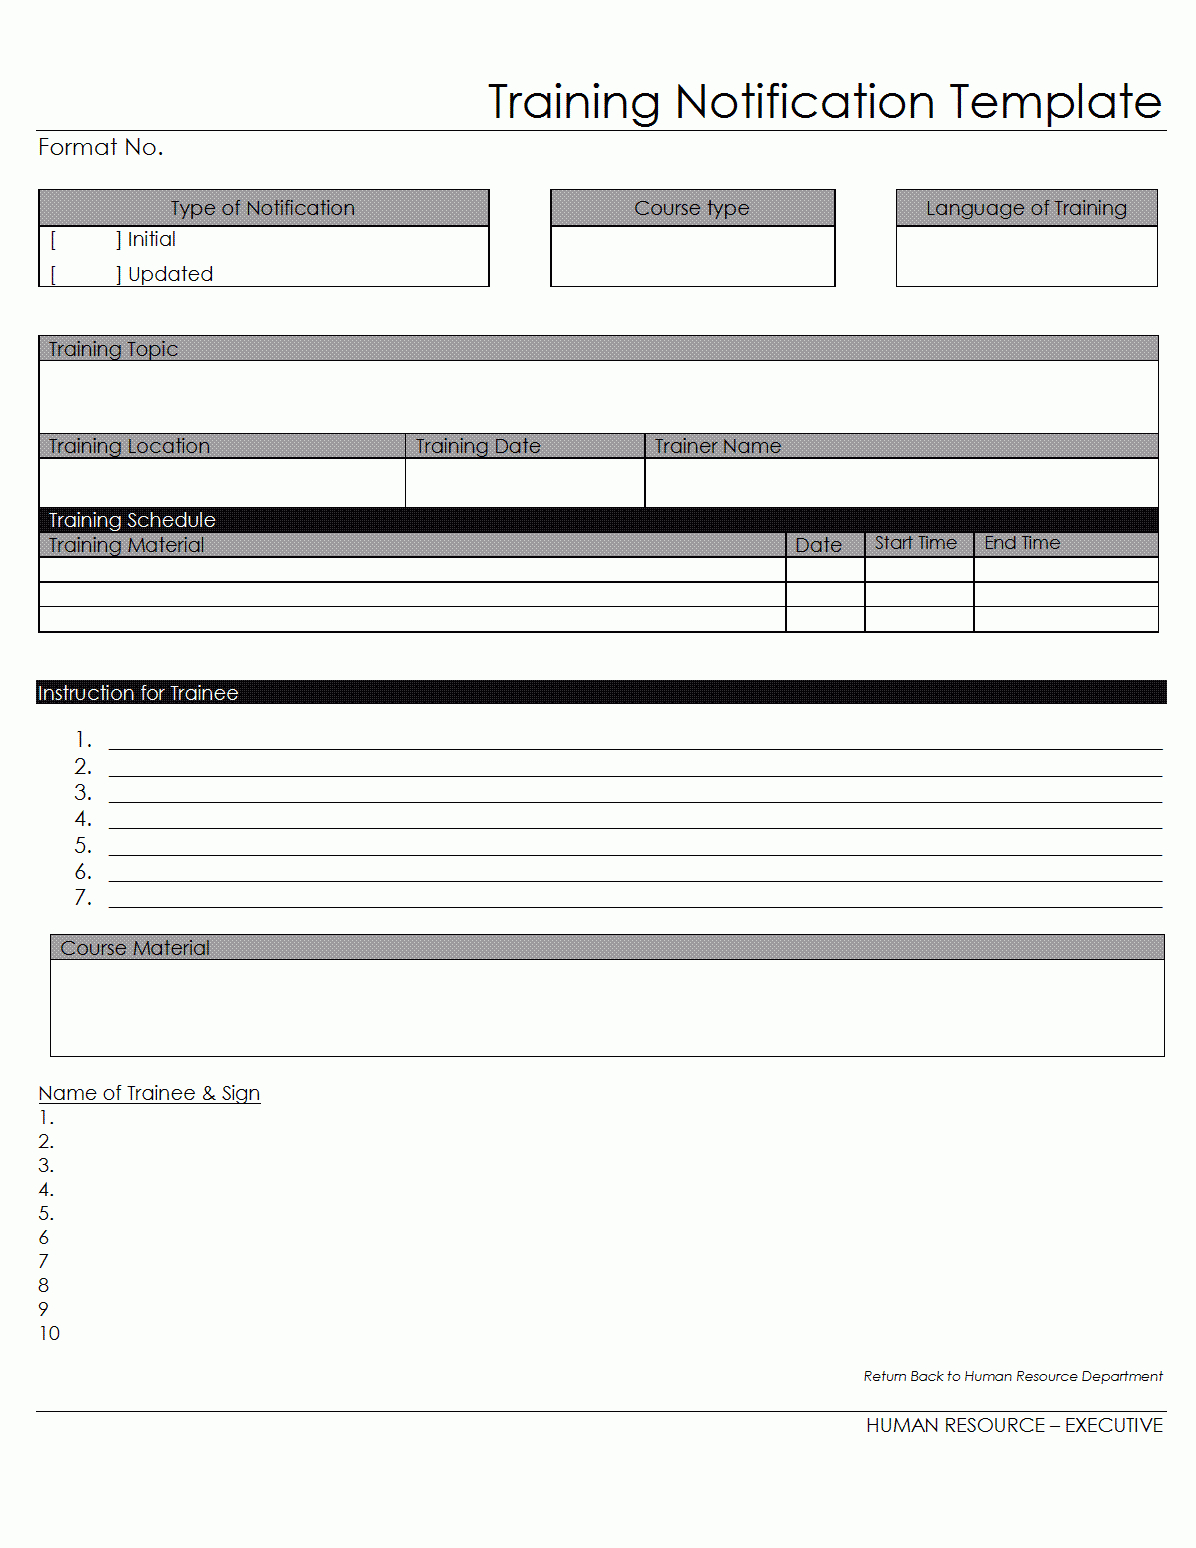 Training Notification Template - Inside Training Report Template Format